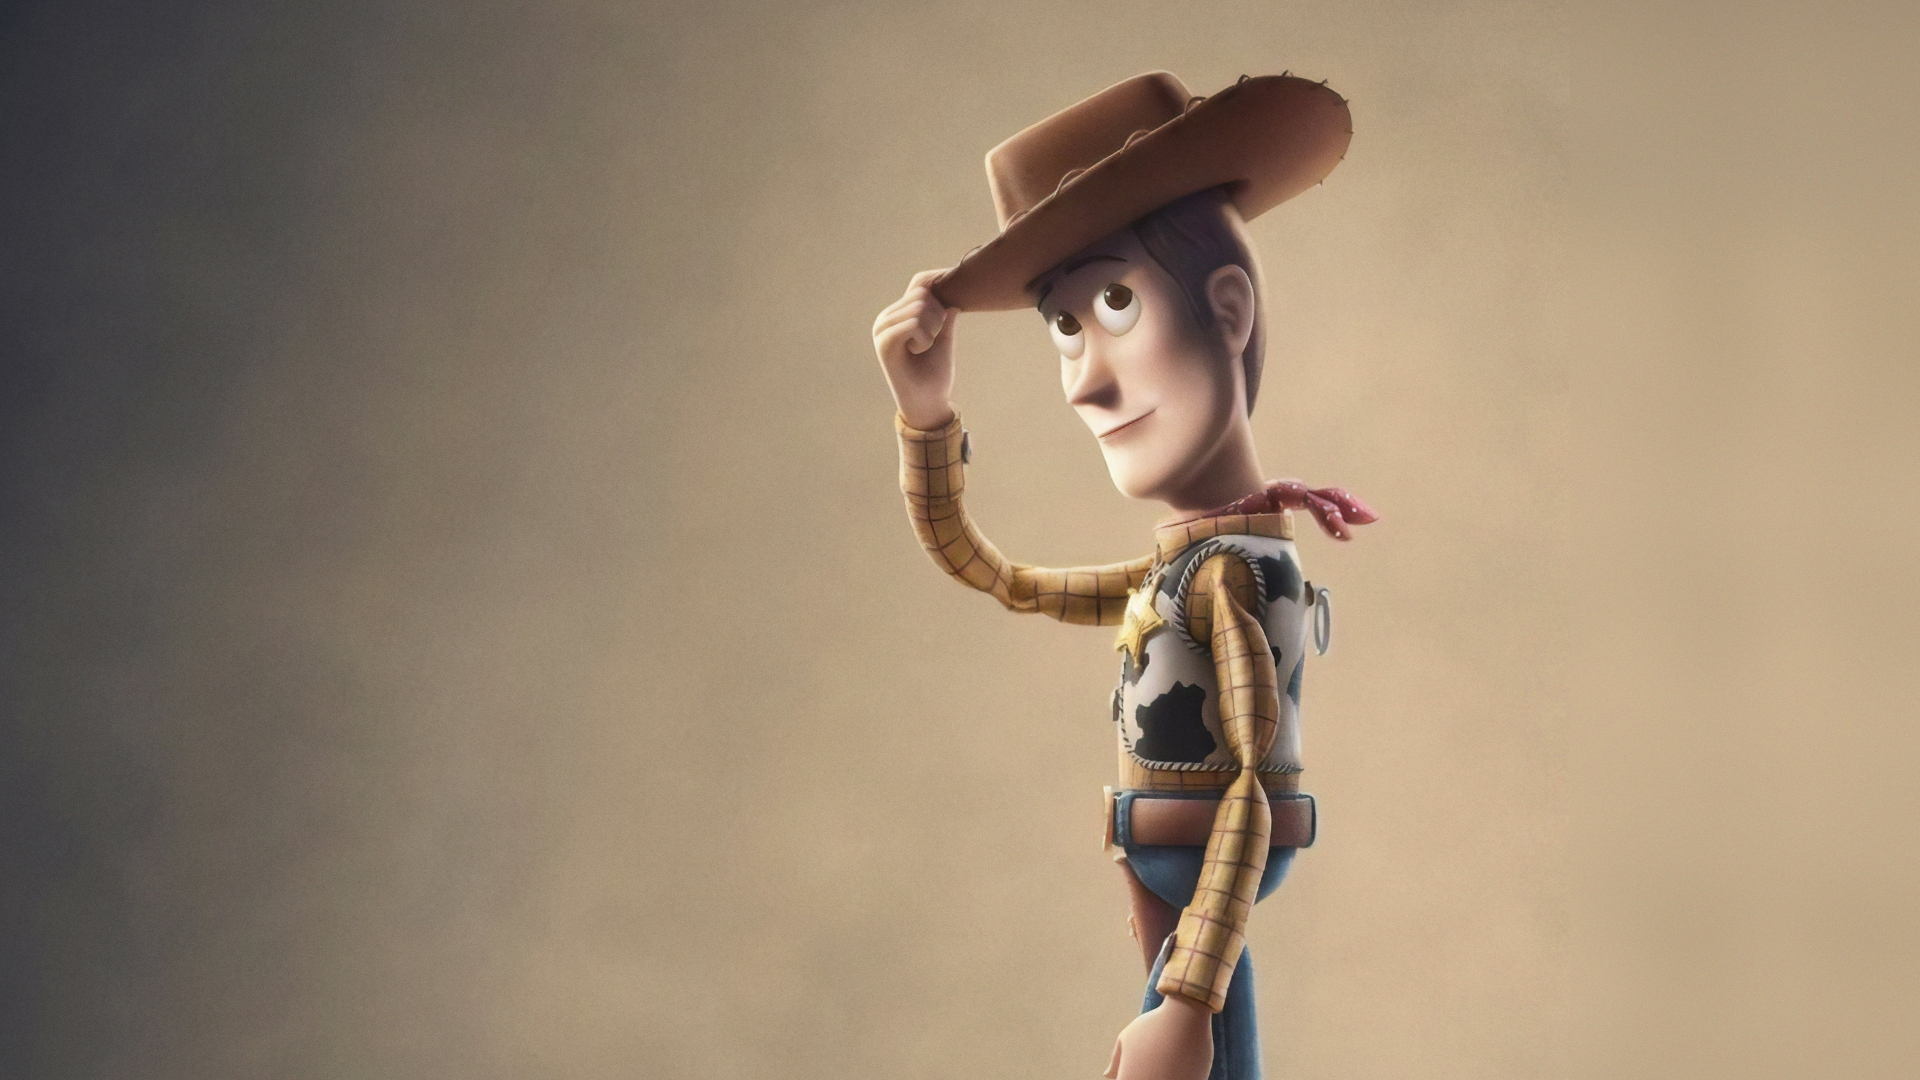 Download 1920x1080 wallpaper toy story 4, woody, animation movie, pixar